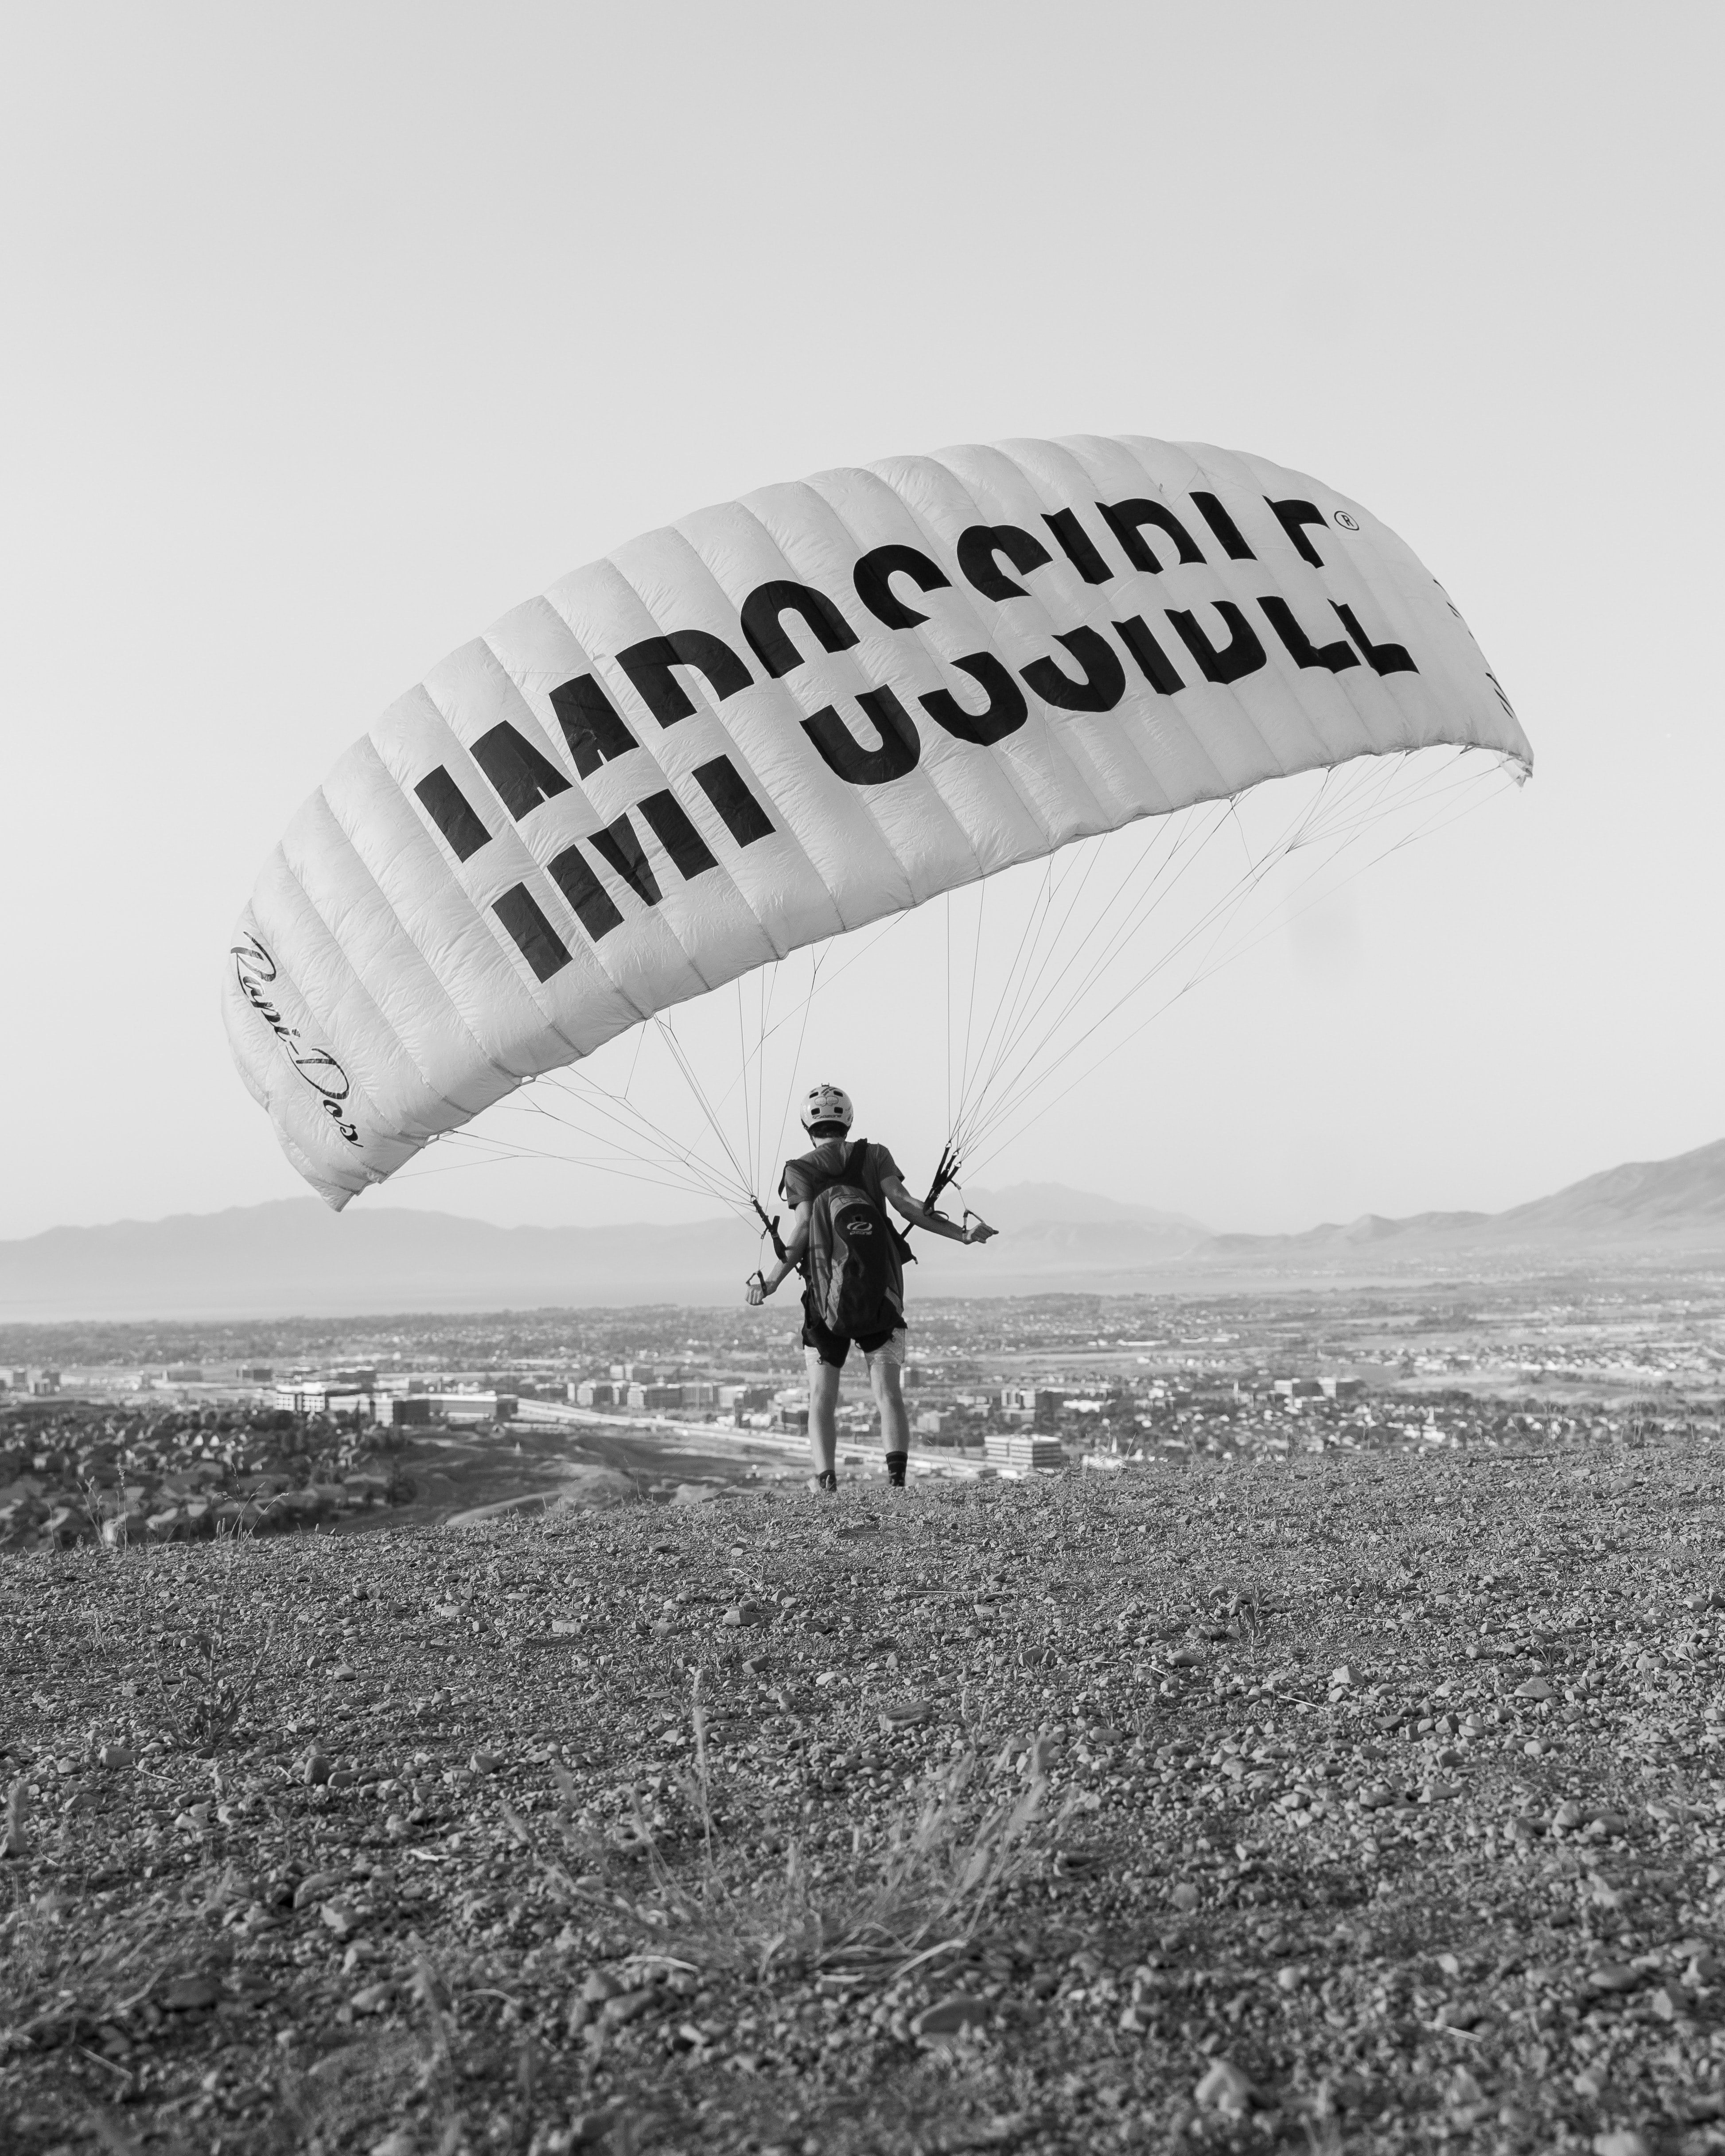 A person at the edge of a cliff prepared to base jump with a white parachute that says IMPOSSIBLE in big black letters with a white line through the middle.